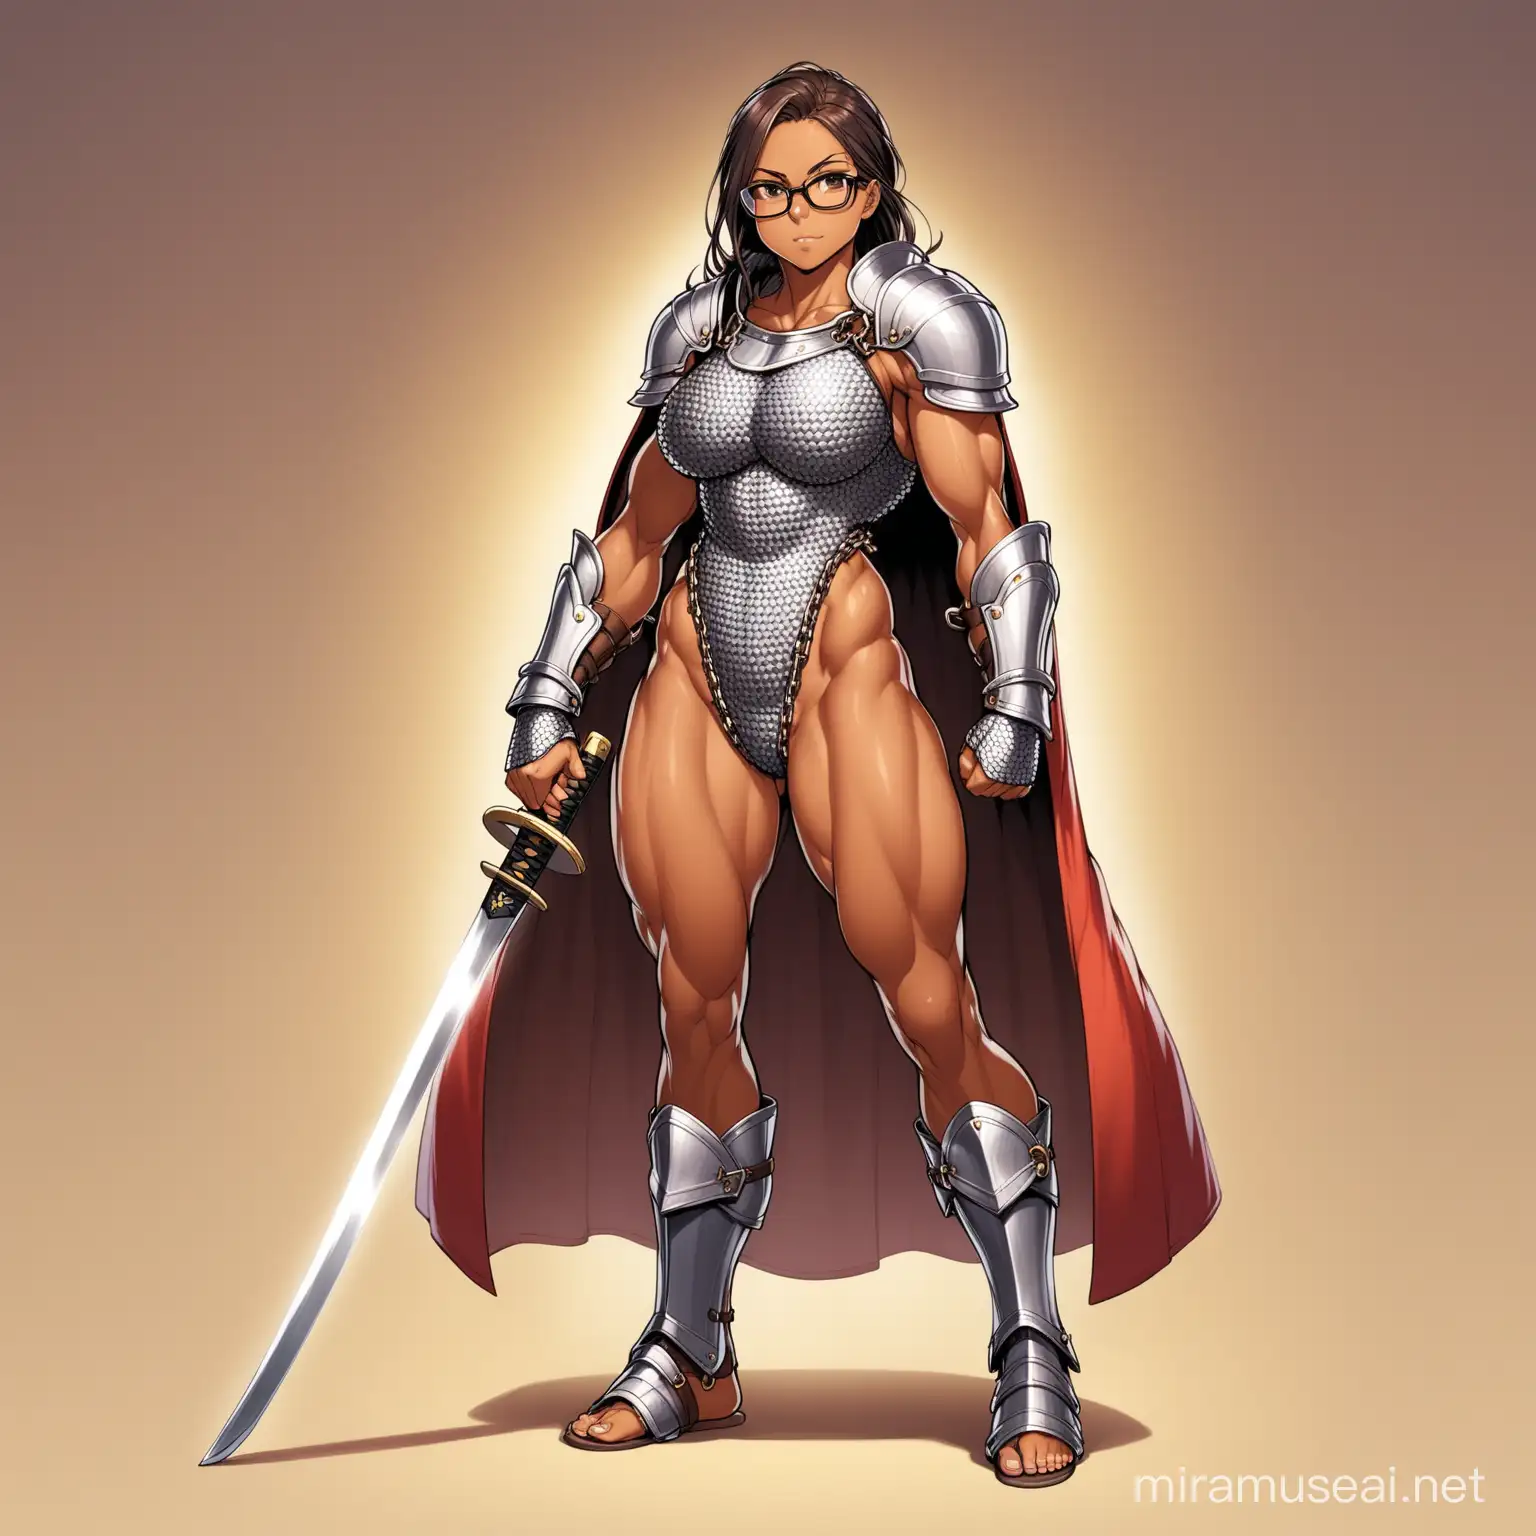 Athletic Female Warrior in Chain Mail Armor with Katana